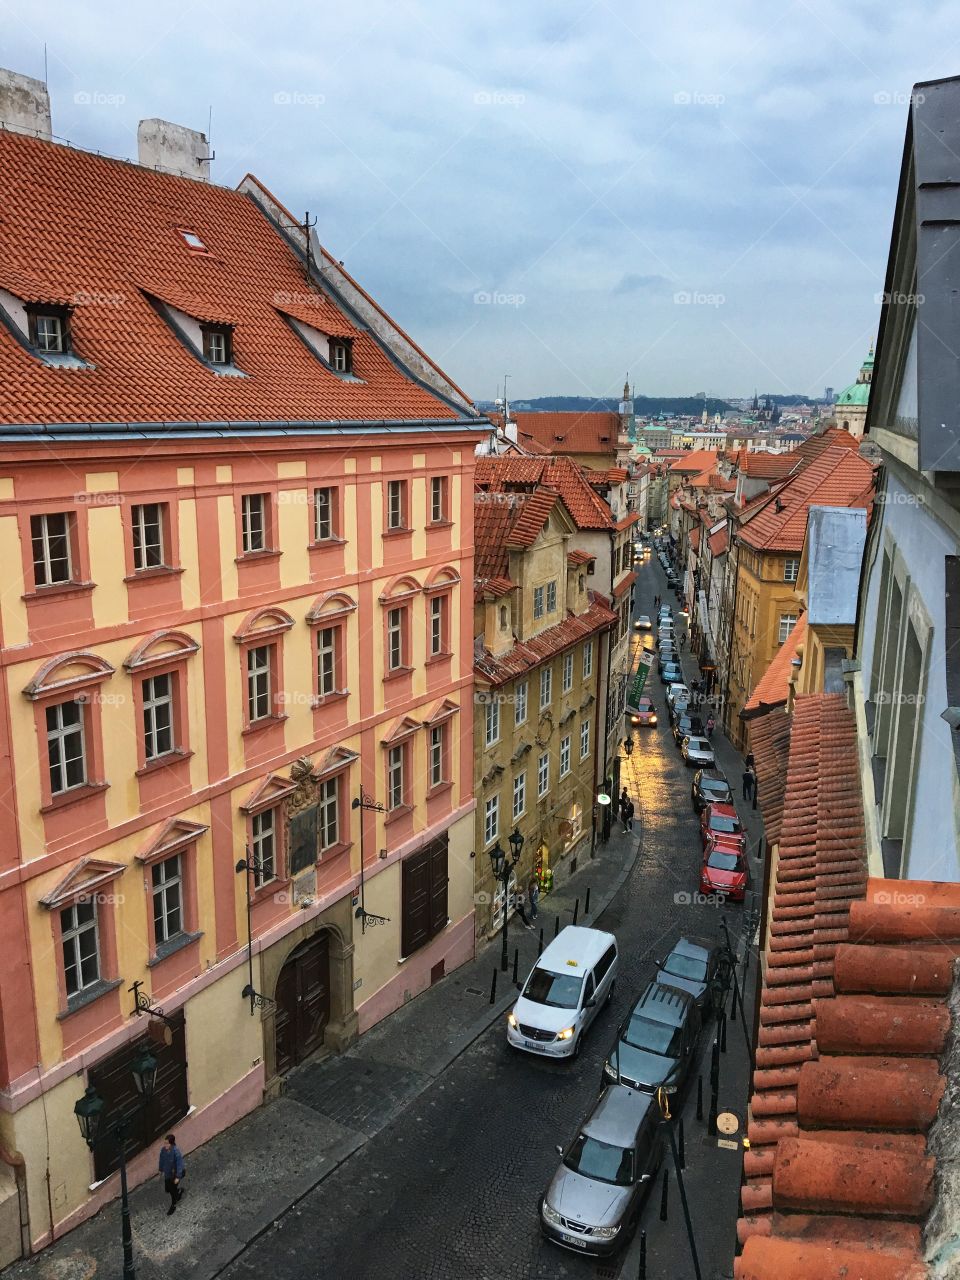 A view from my Hotel window in Prague looking down the street … love the architecture and the car headlights shining brightly in the road. 